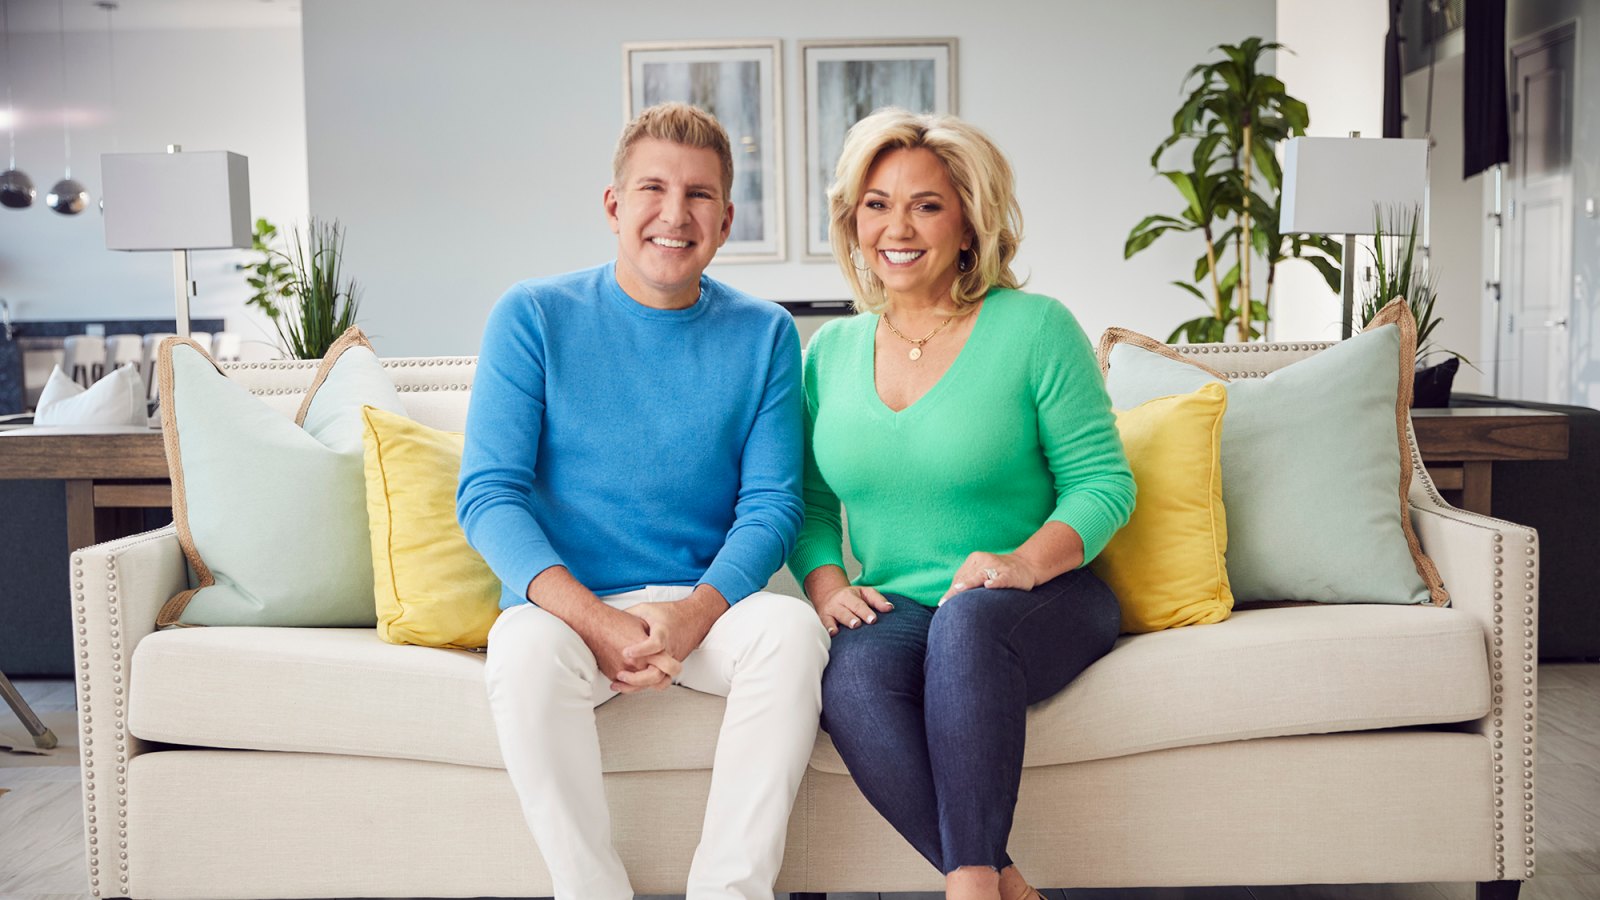 todd-julie-chrisley-share-exciting-medical-update